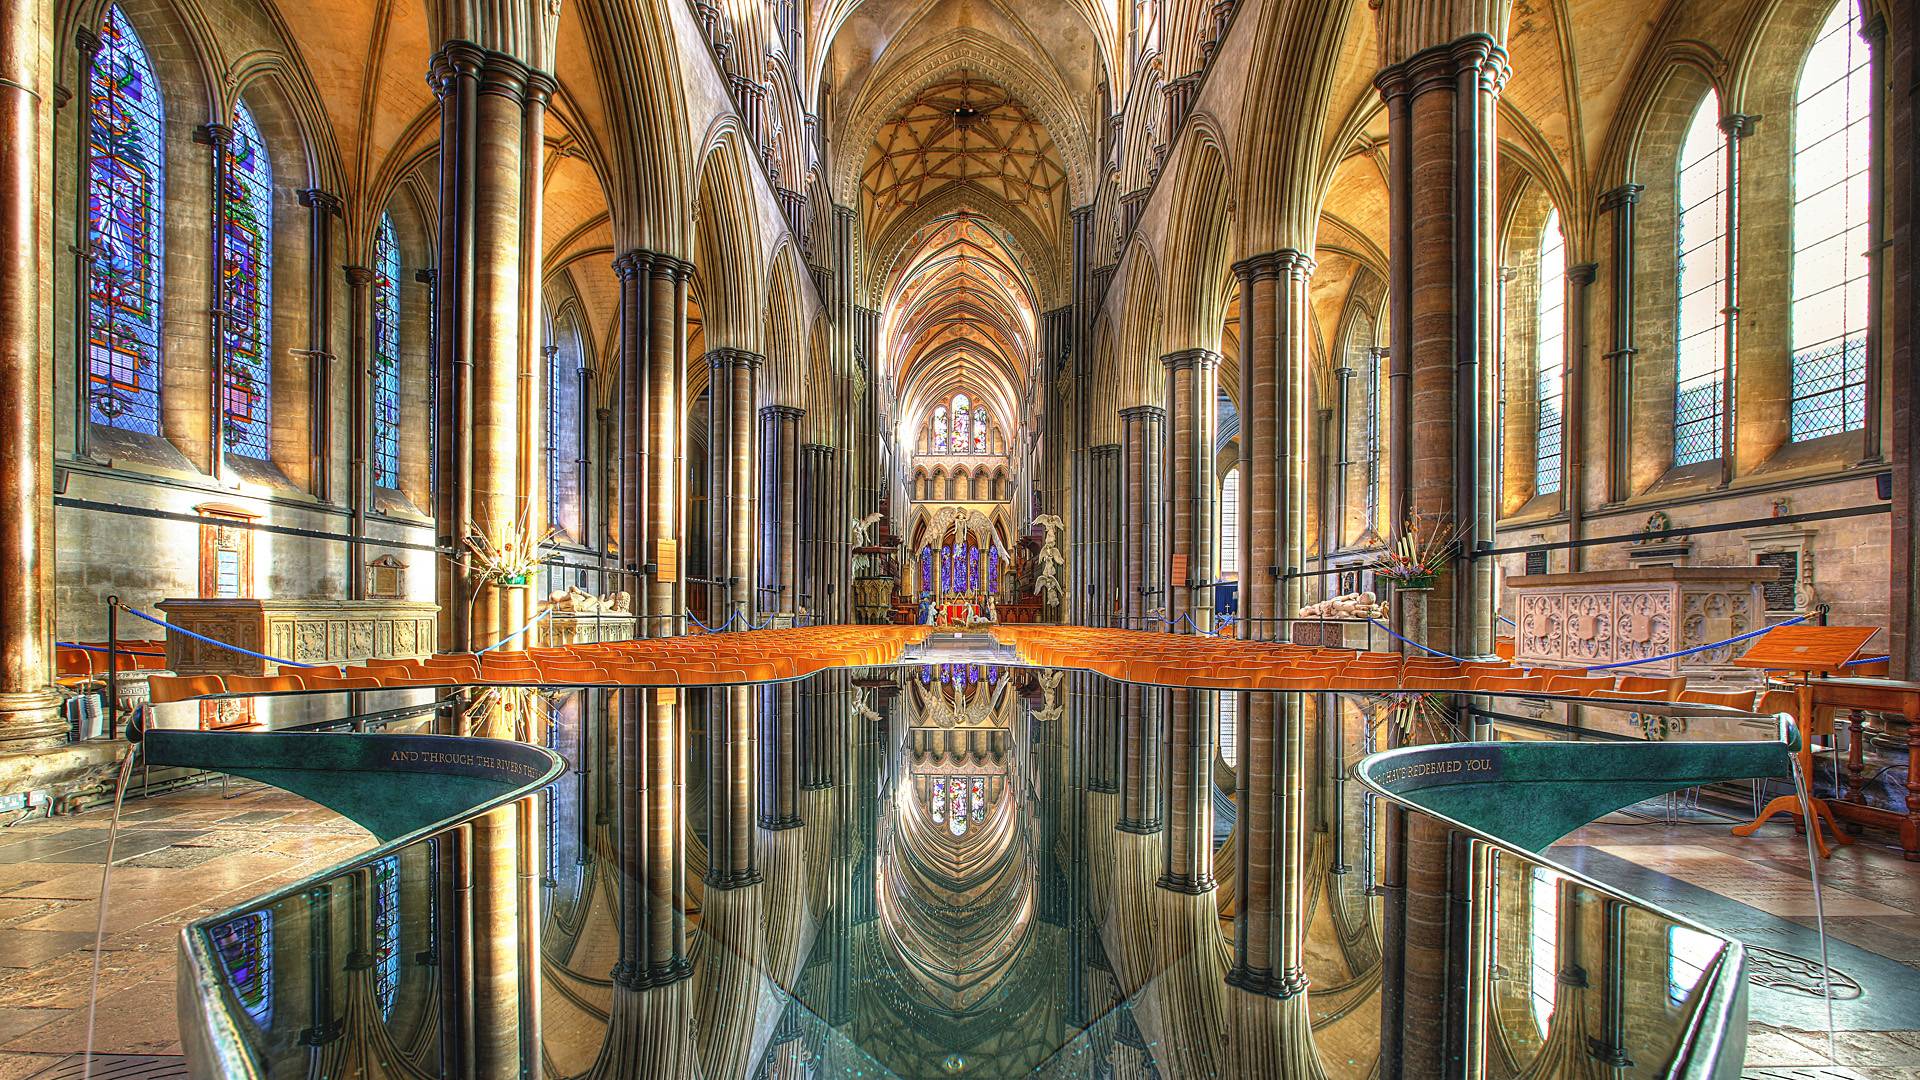 Reflection Ceiling Of The Church Wallpaper 1920x1080 px Free